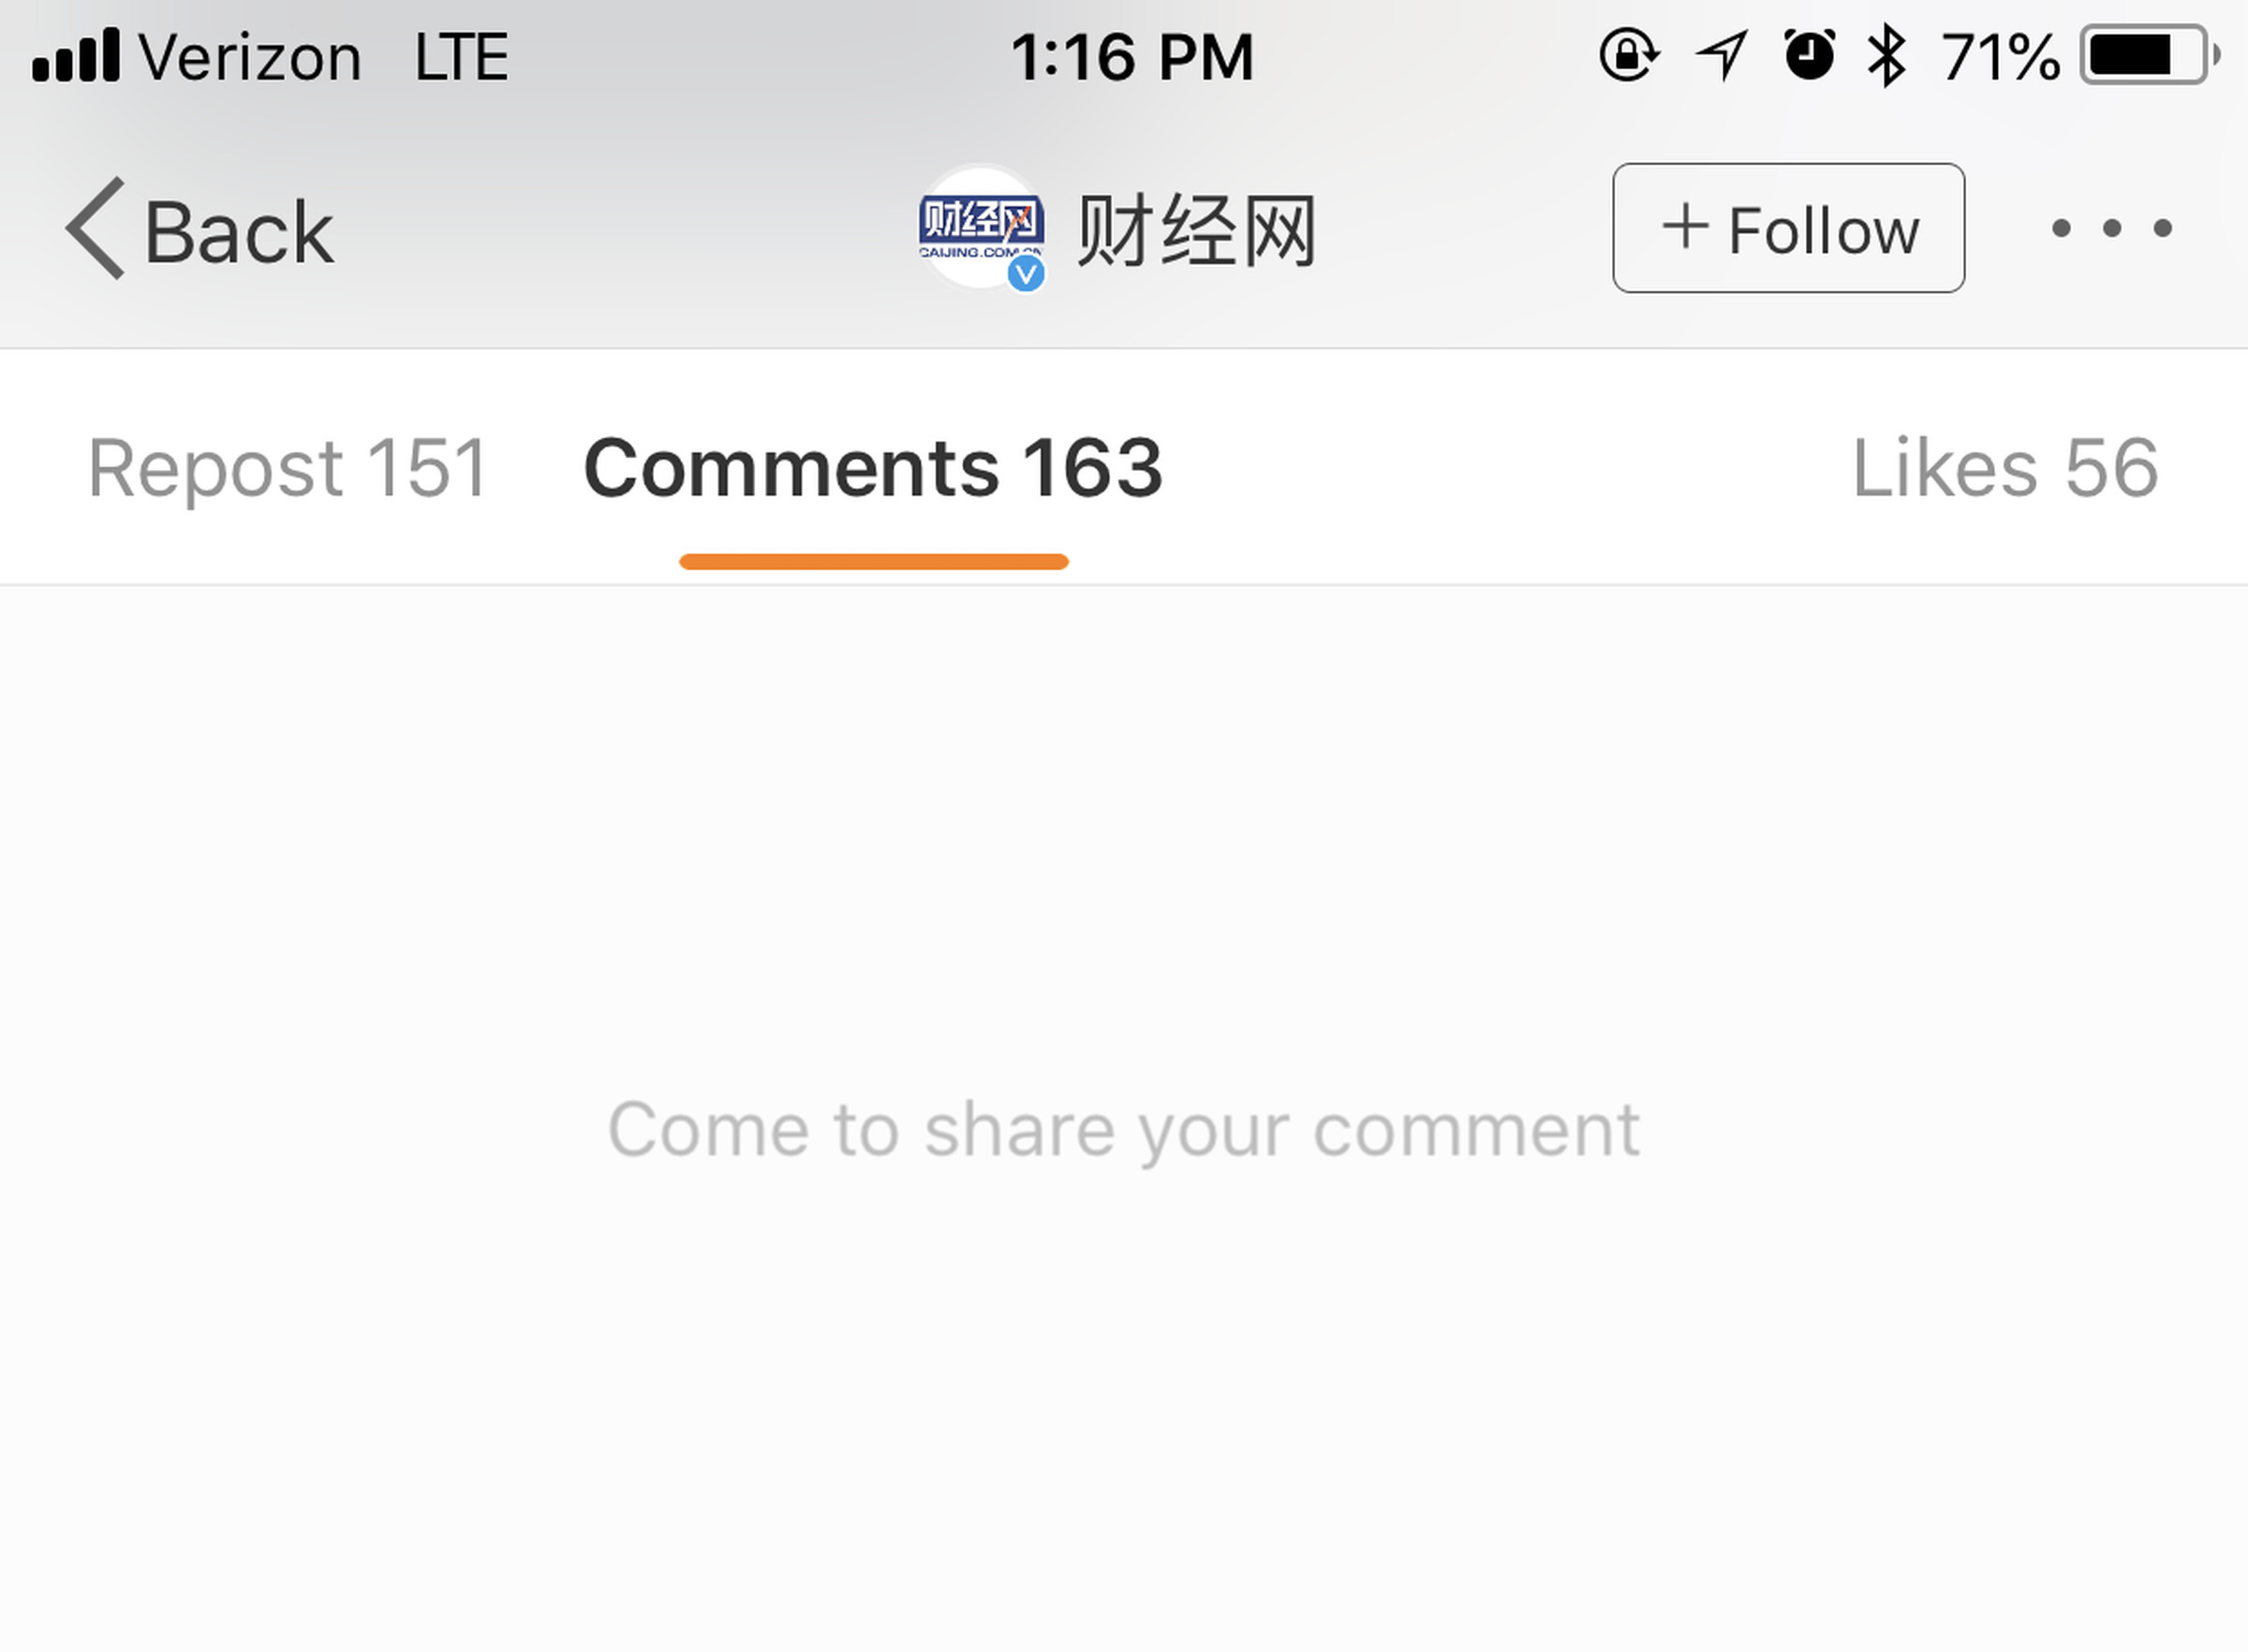 163 comments on a news article about the Hainan tourism plan have been hidden on Weibo.